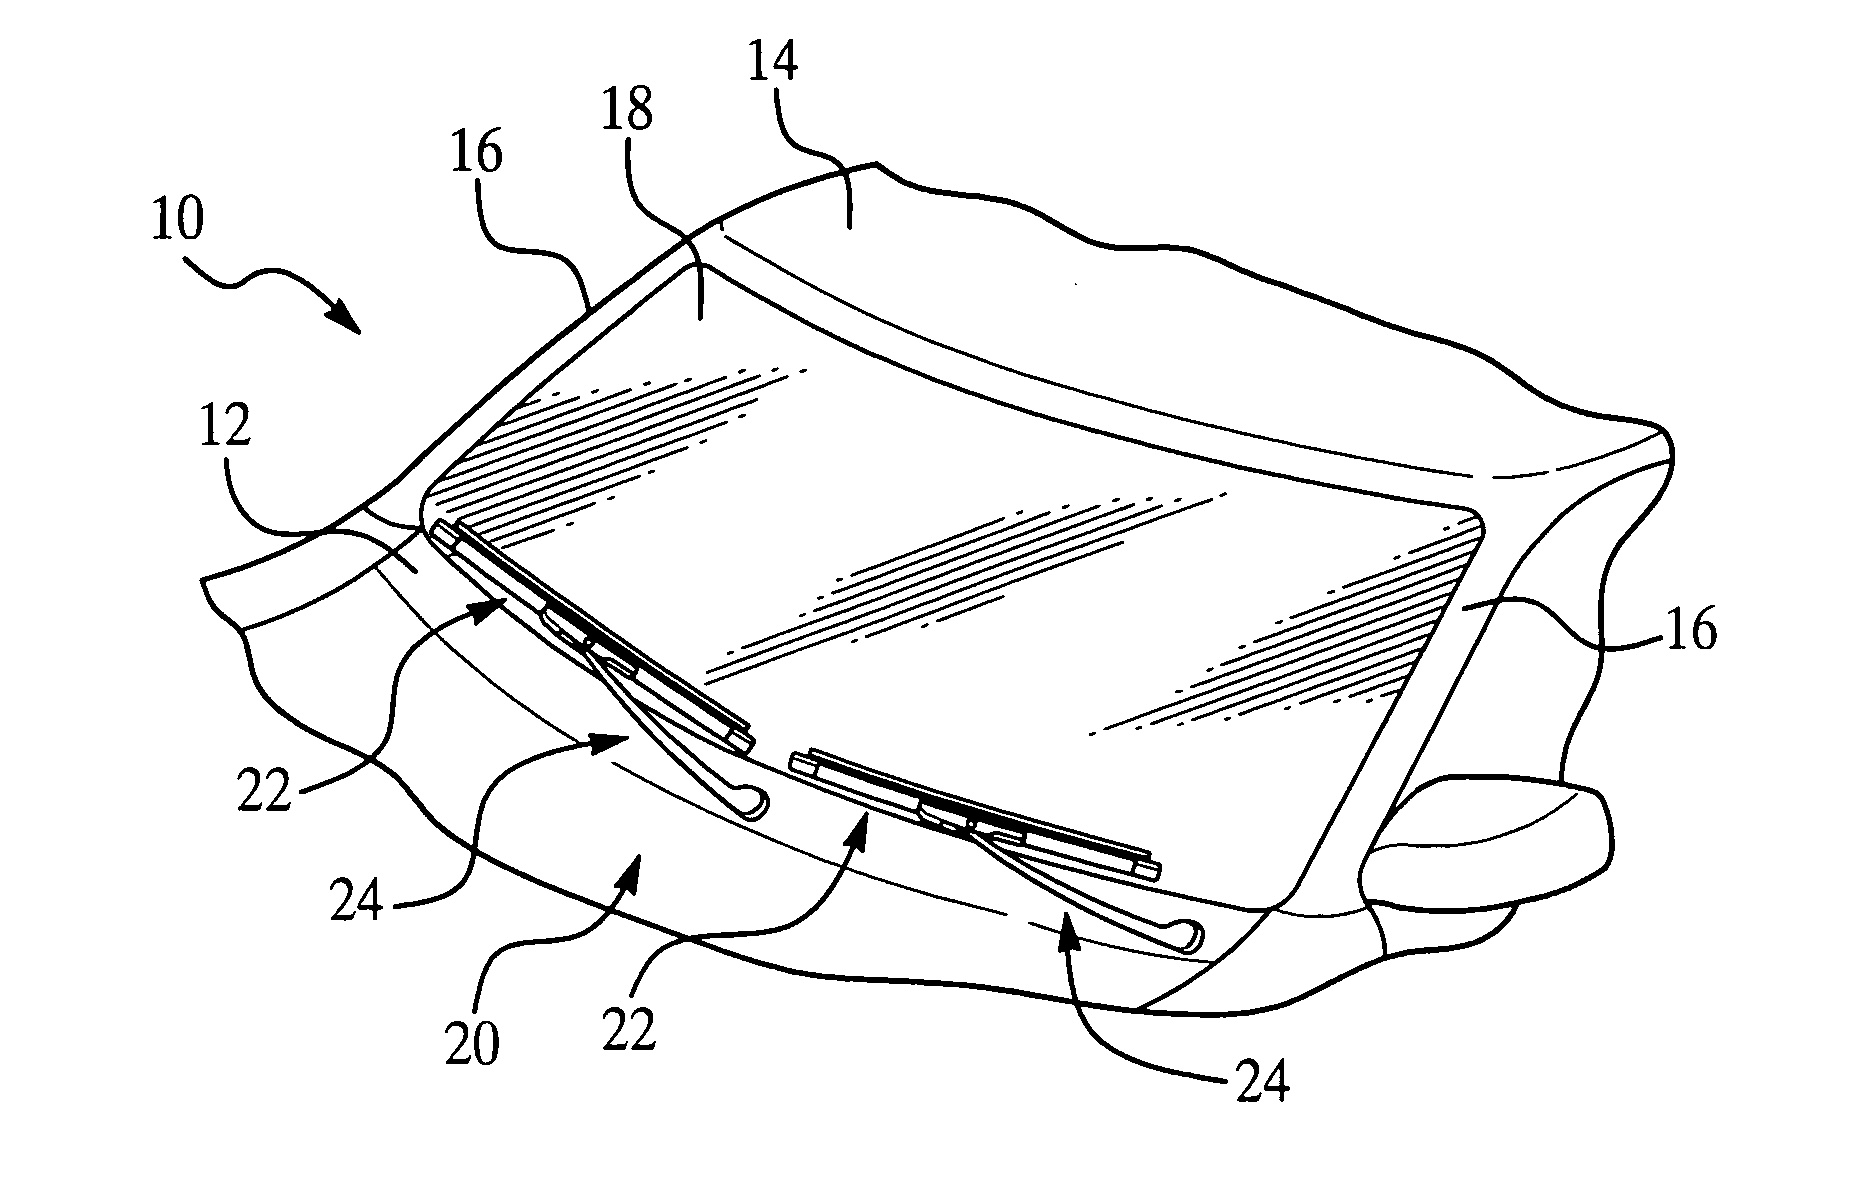 Beam blade windshield wiper assembly having an airfoil